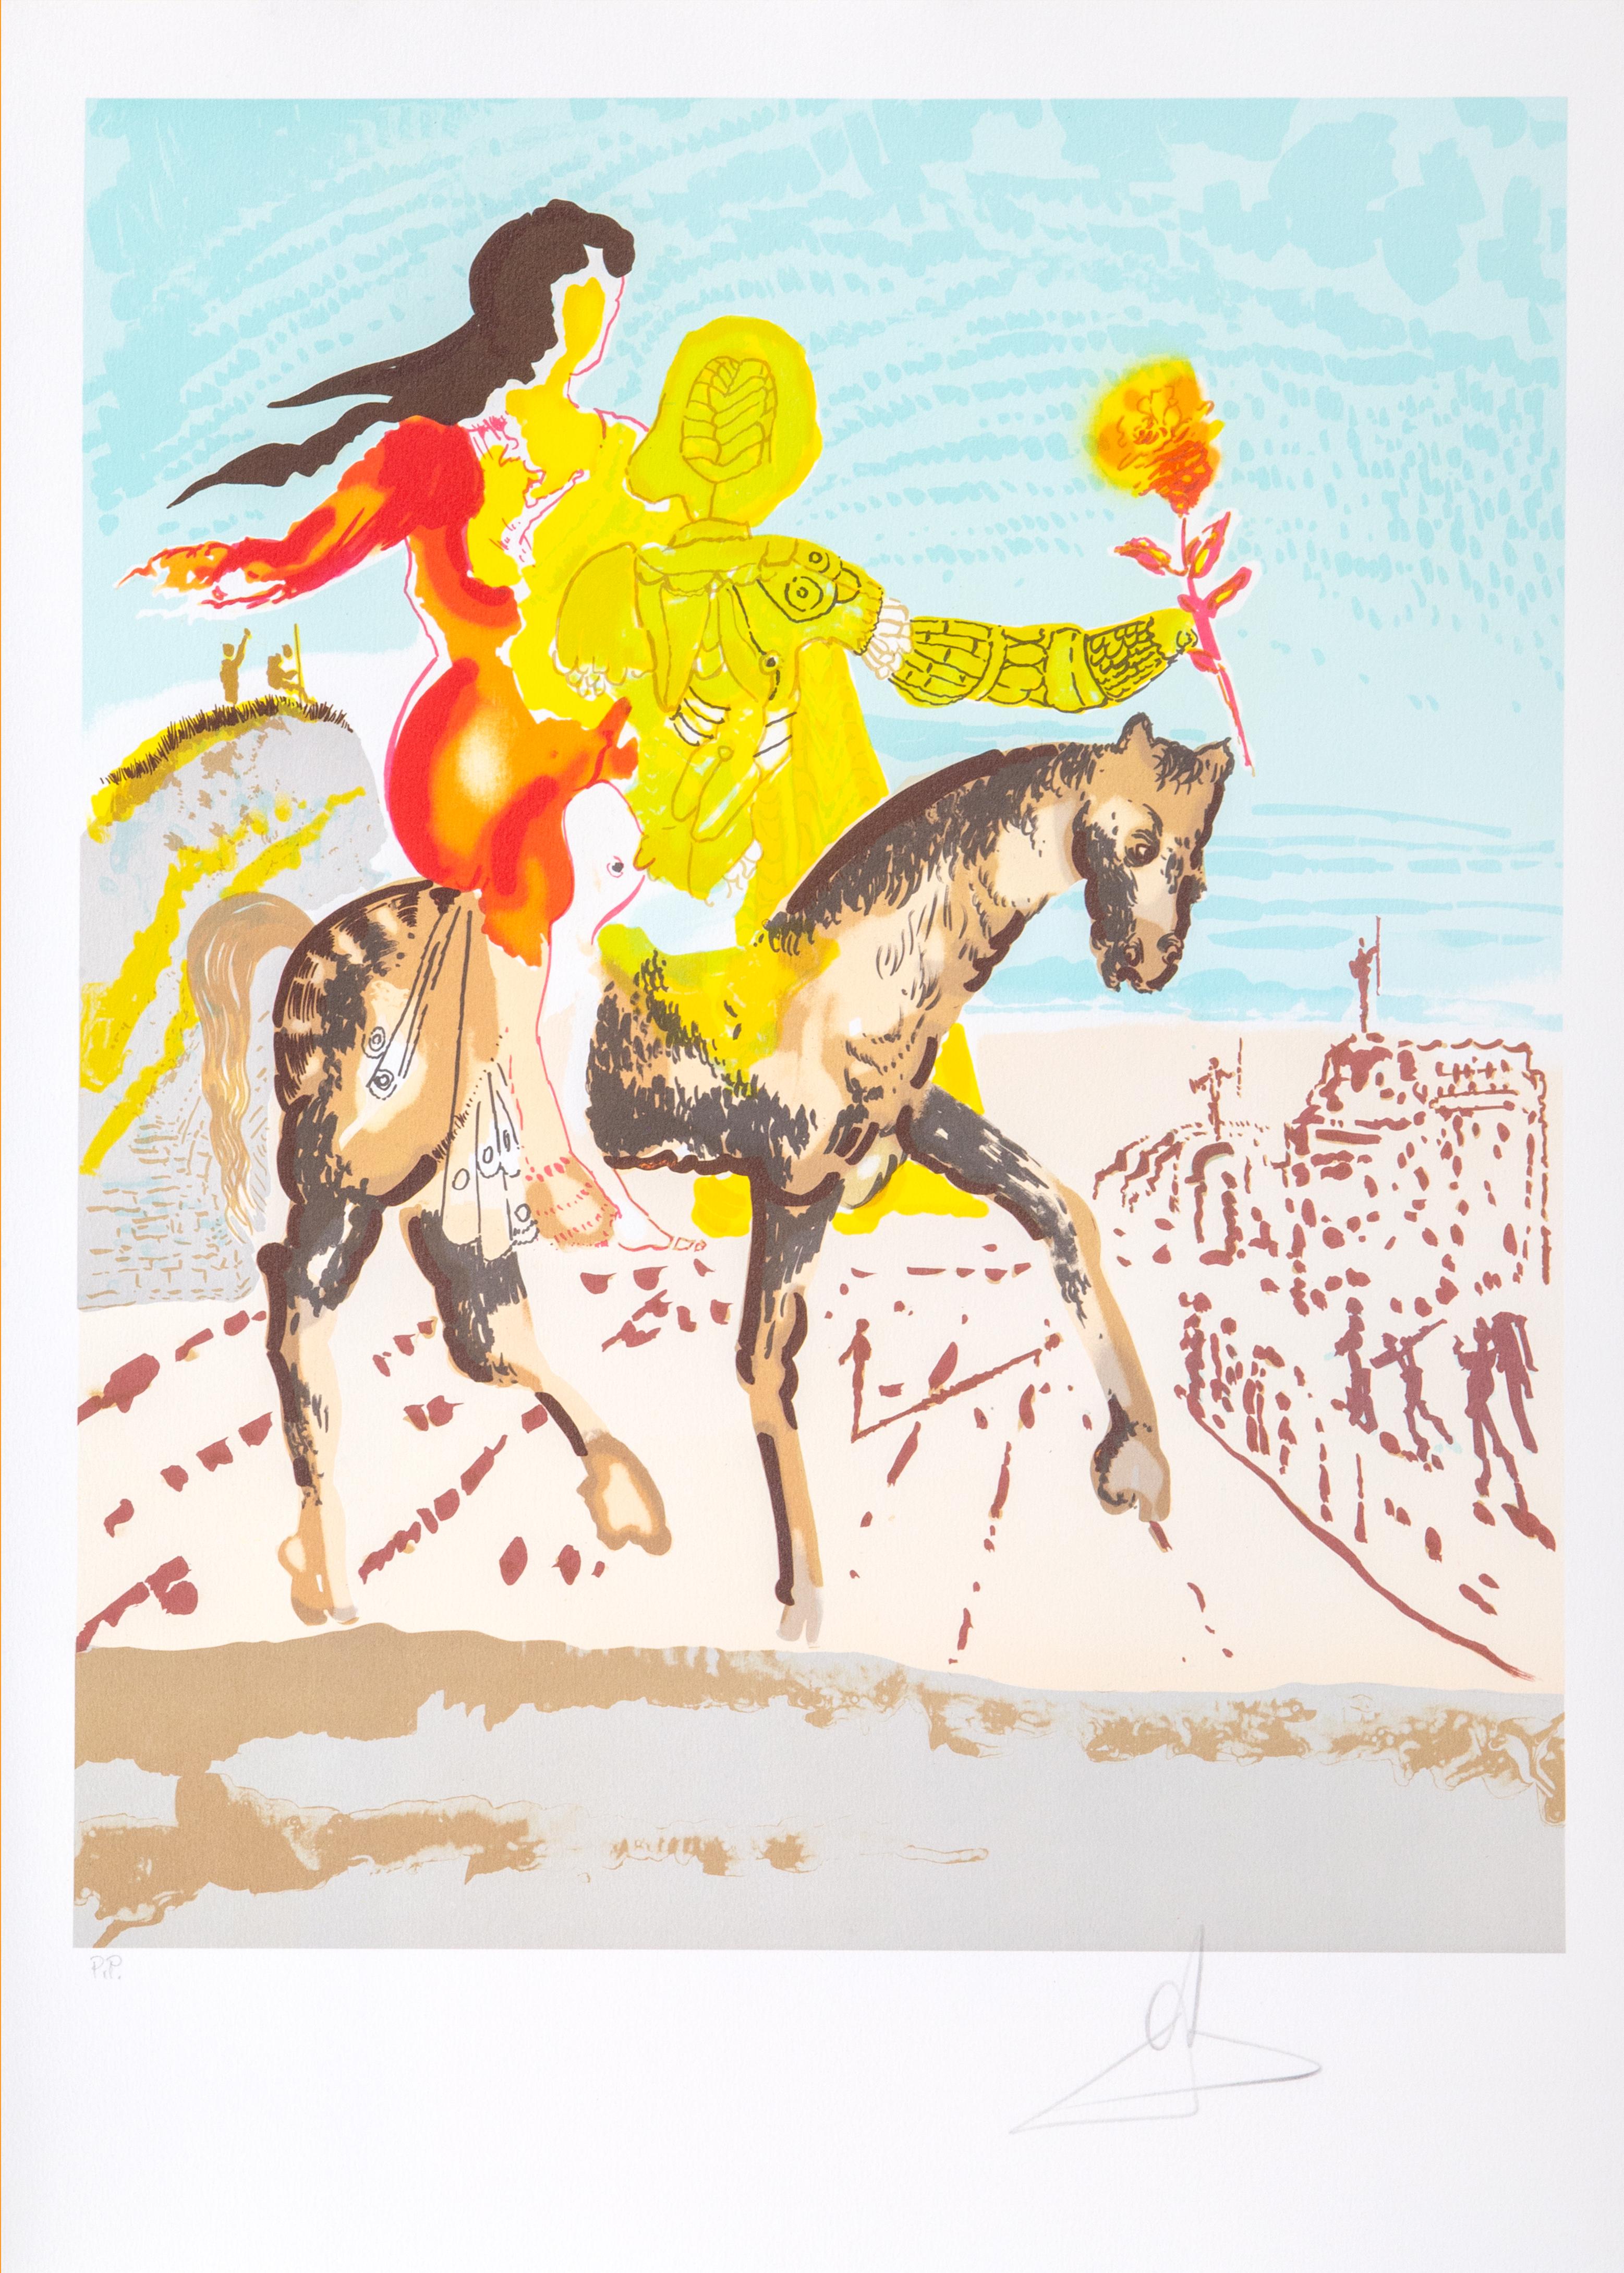 Salvador Dalí Figurative Print - The Messiah from the New Jerusalem Suite